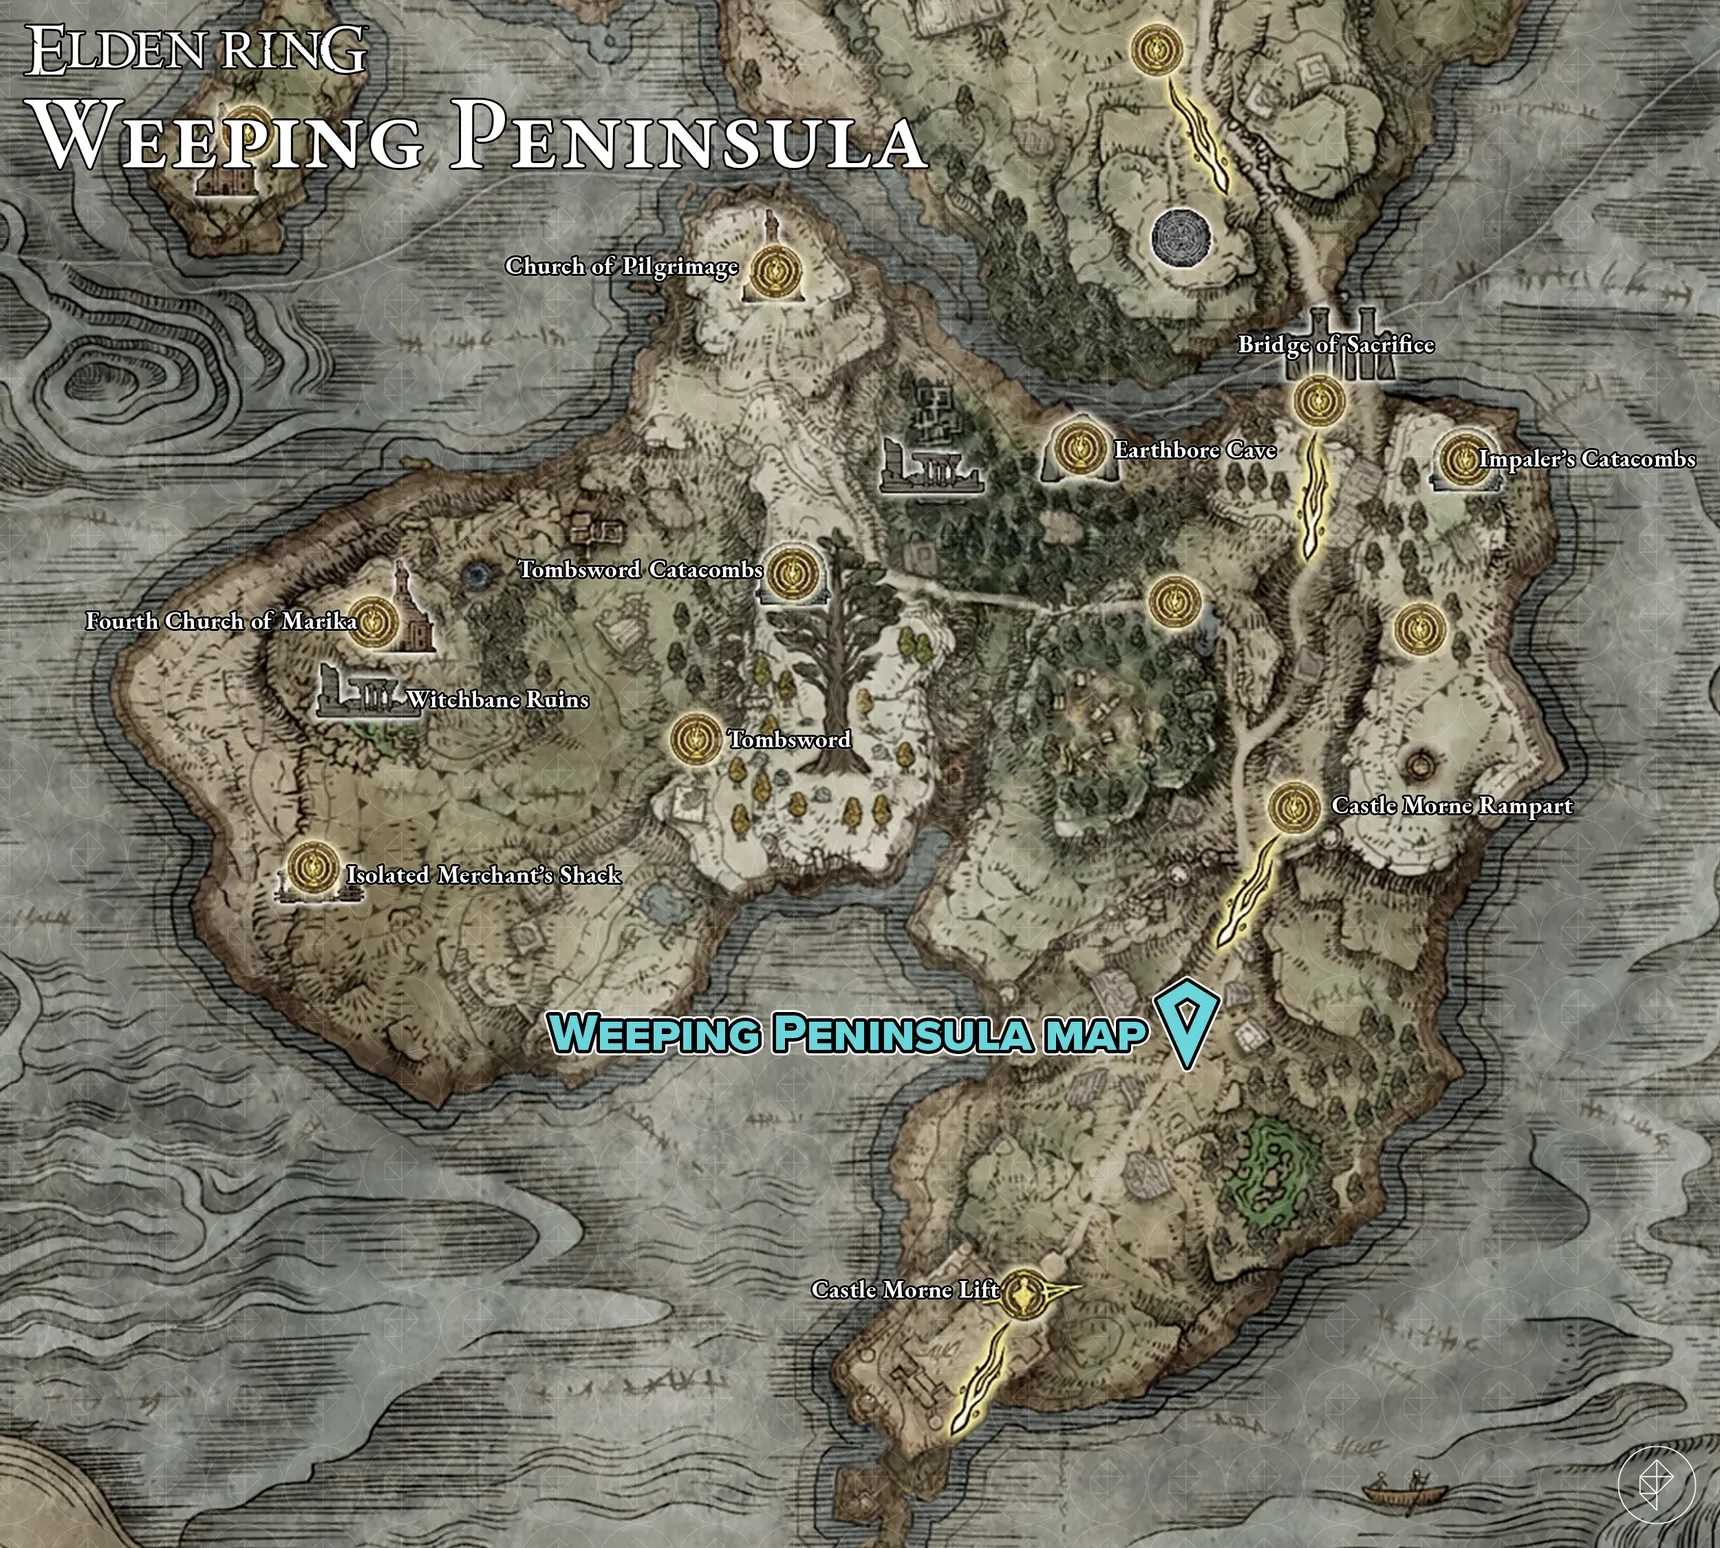 WEEPING PENINSULA MAP FRAGMENT STELE LOCATIONS